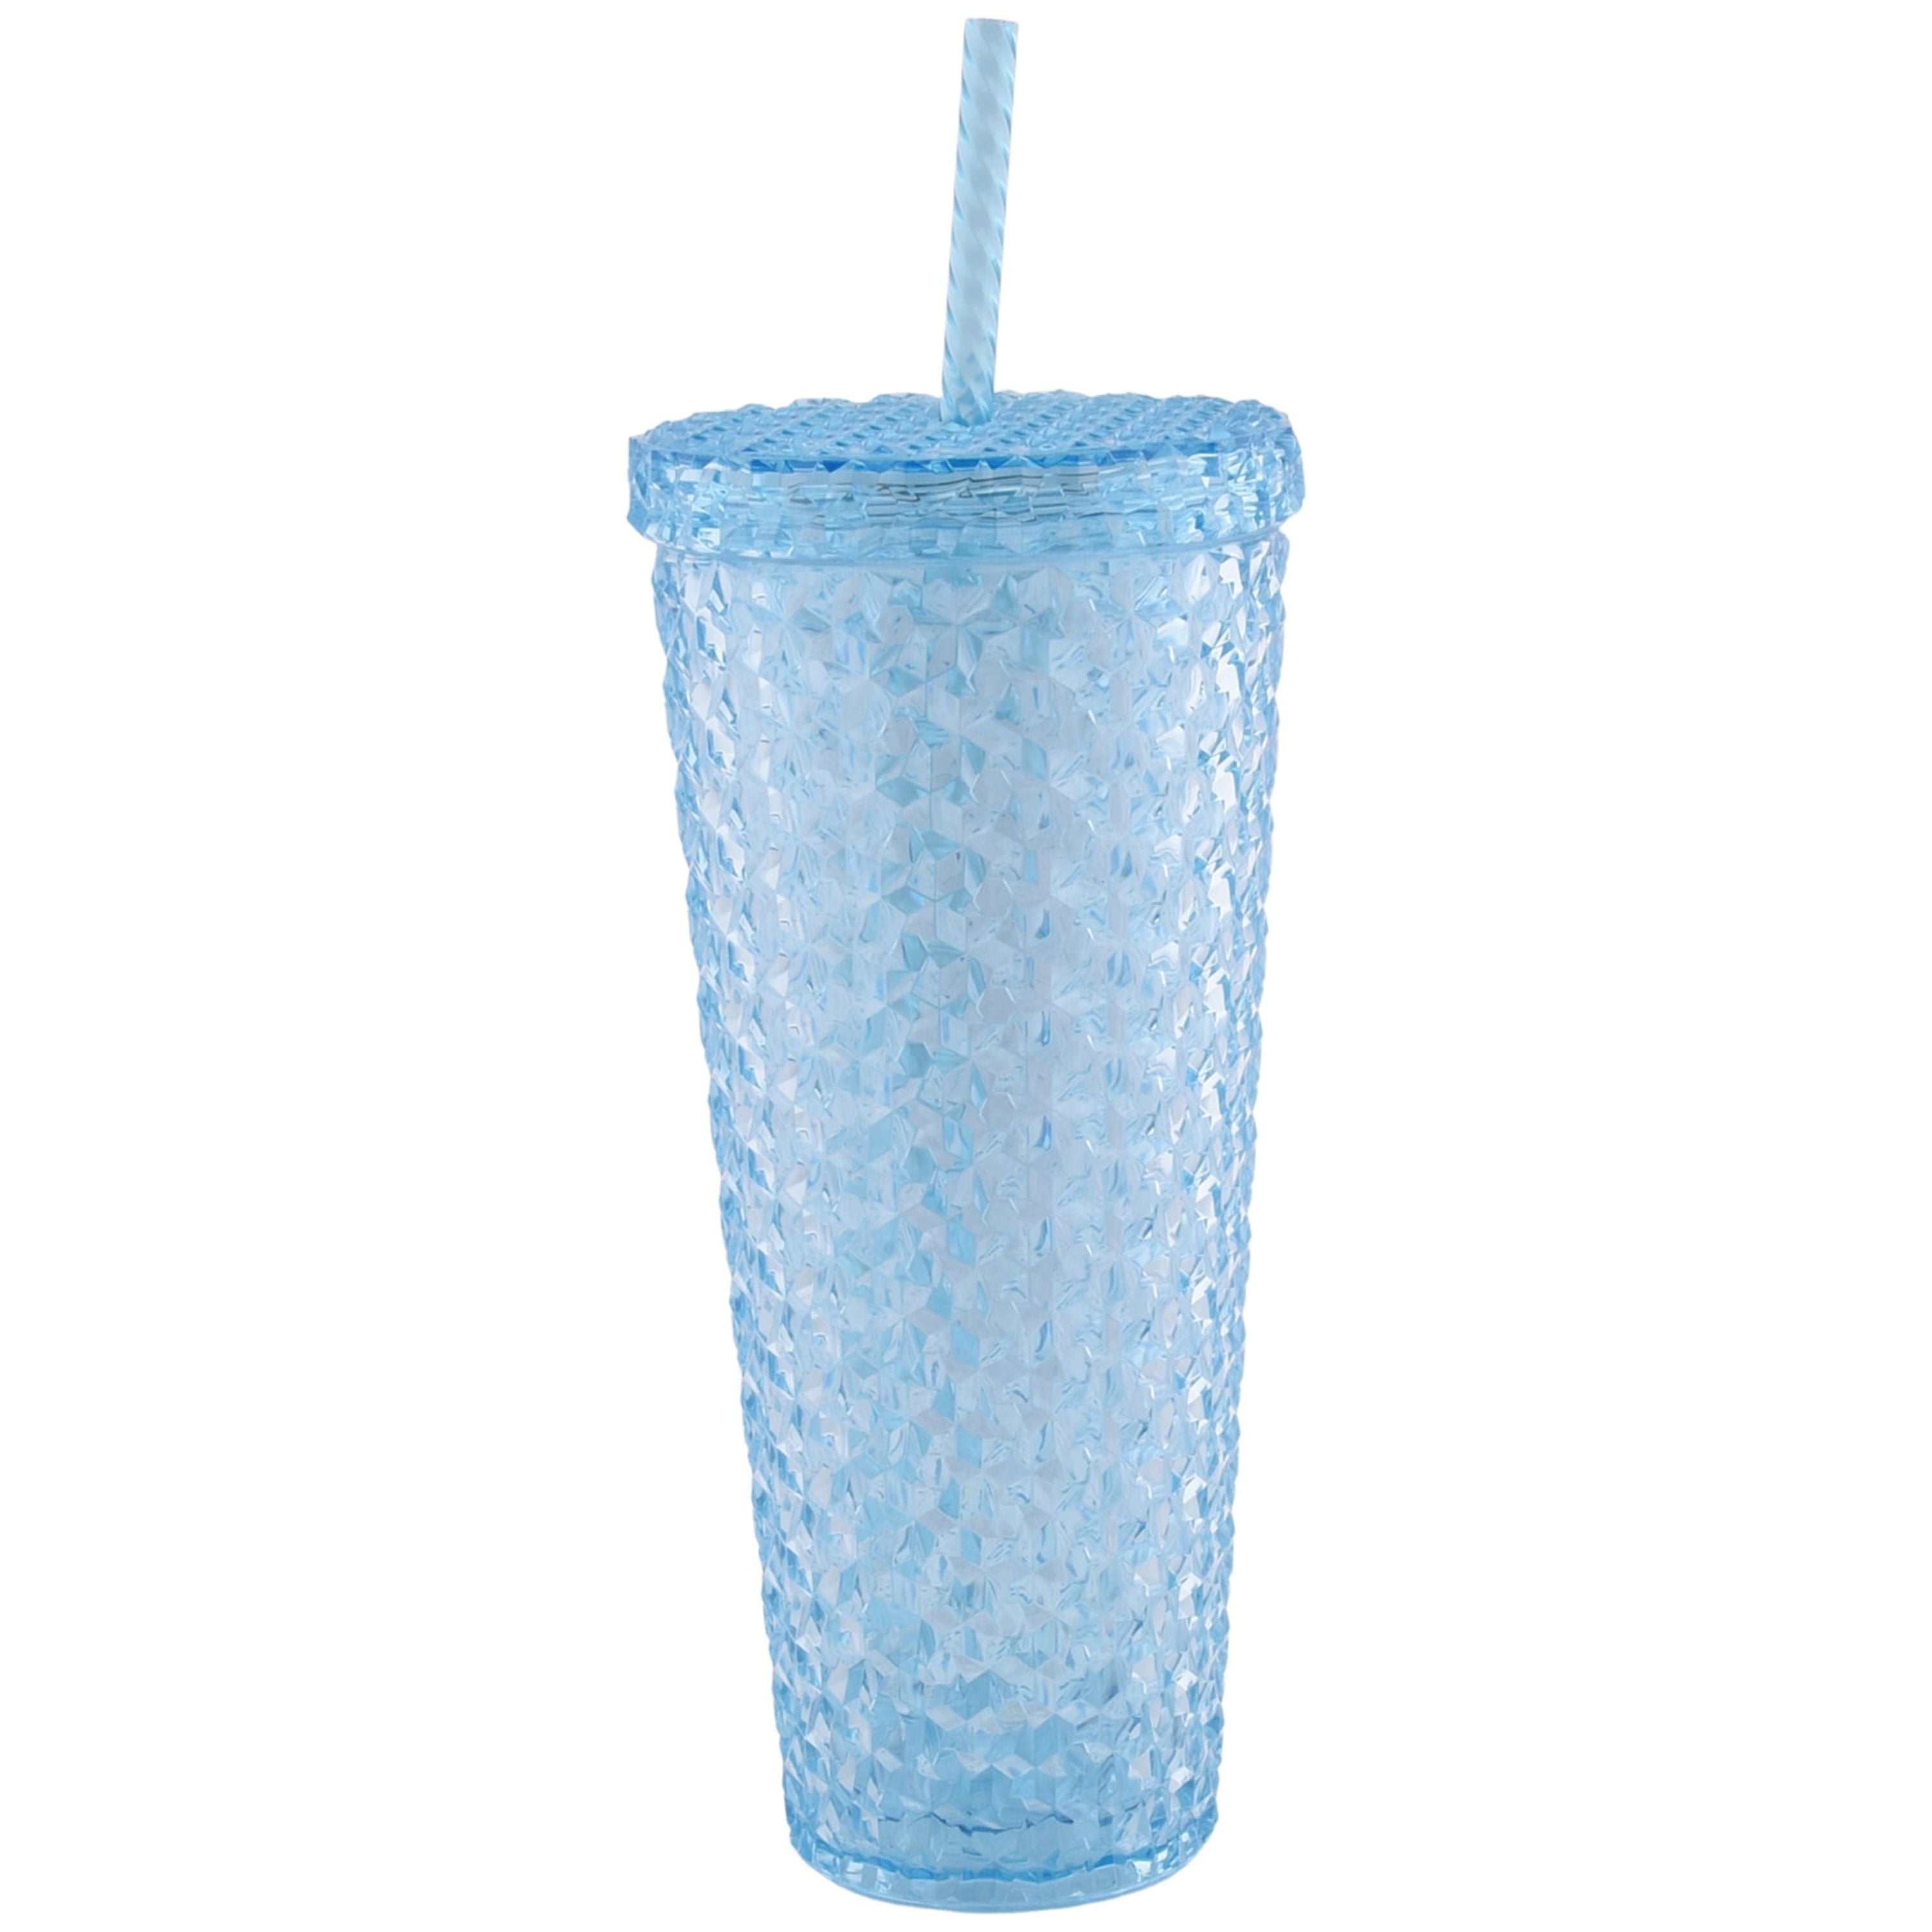 Holiday Time 26 oz Teal Plastic Tumbler, 4 Pack